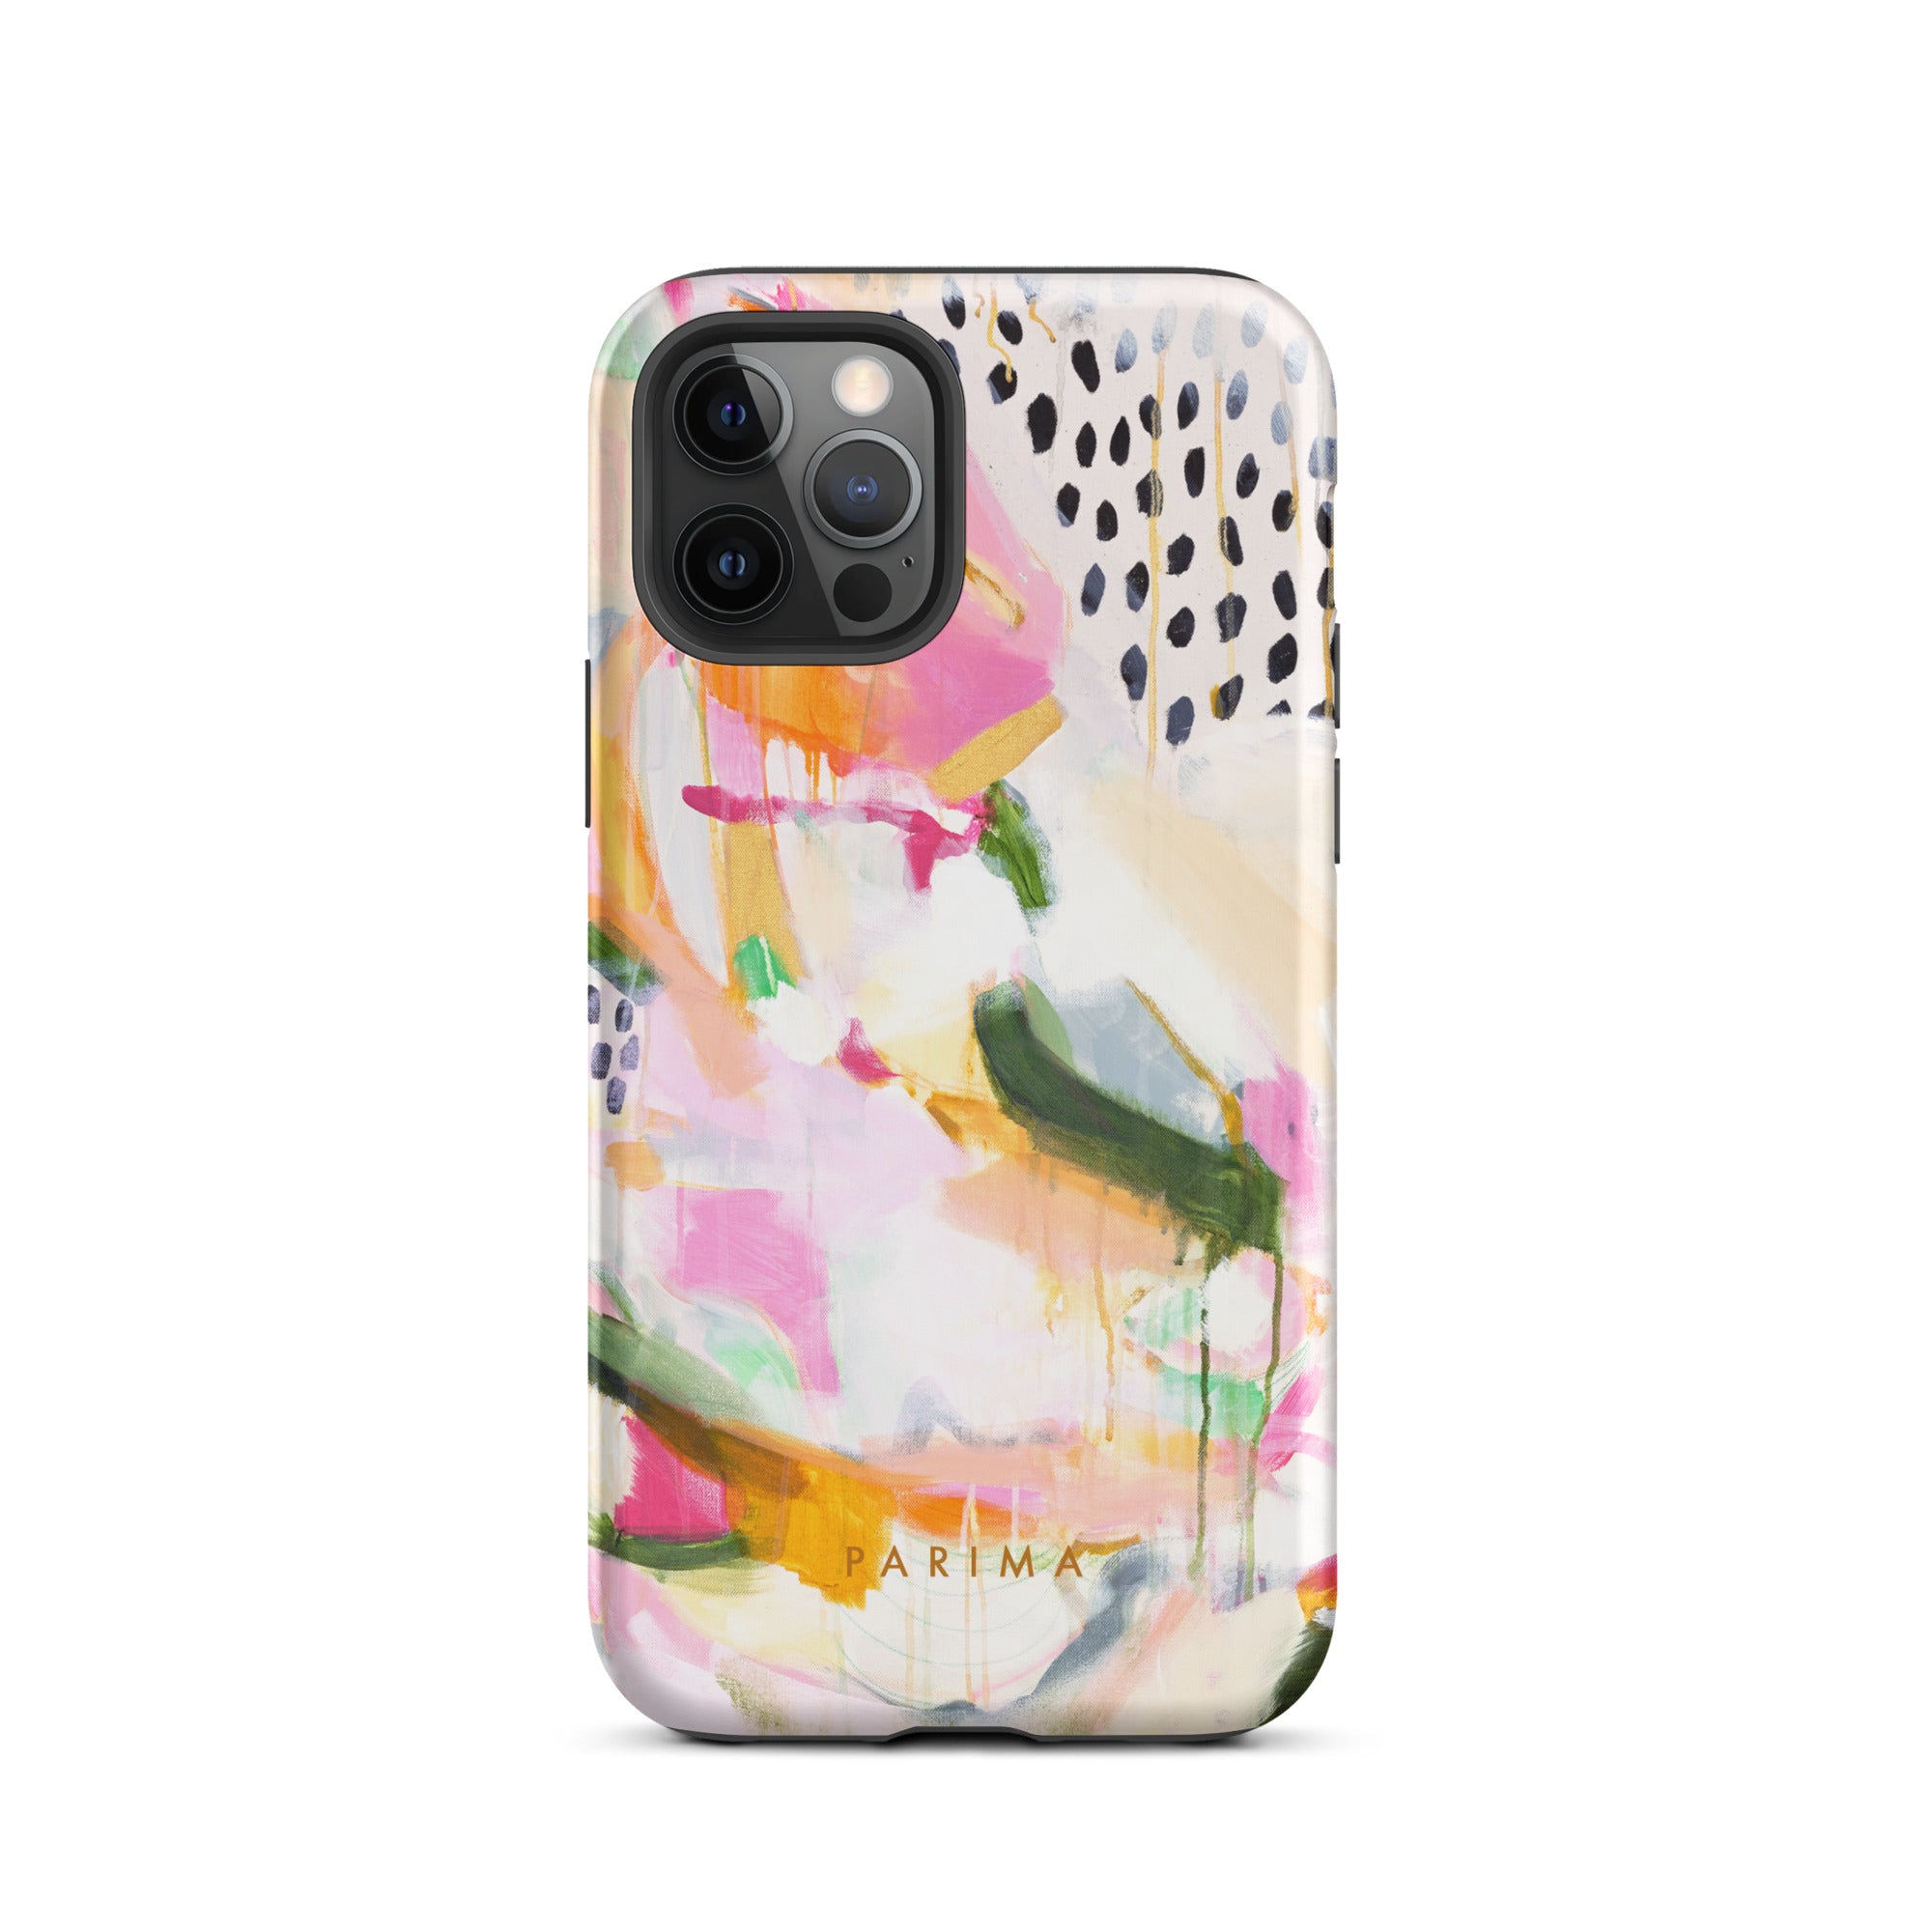 Adira, pink and green abstract art - iPhone 12 Pro tough case by Parima Studio